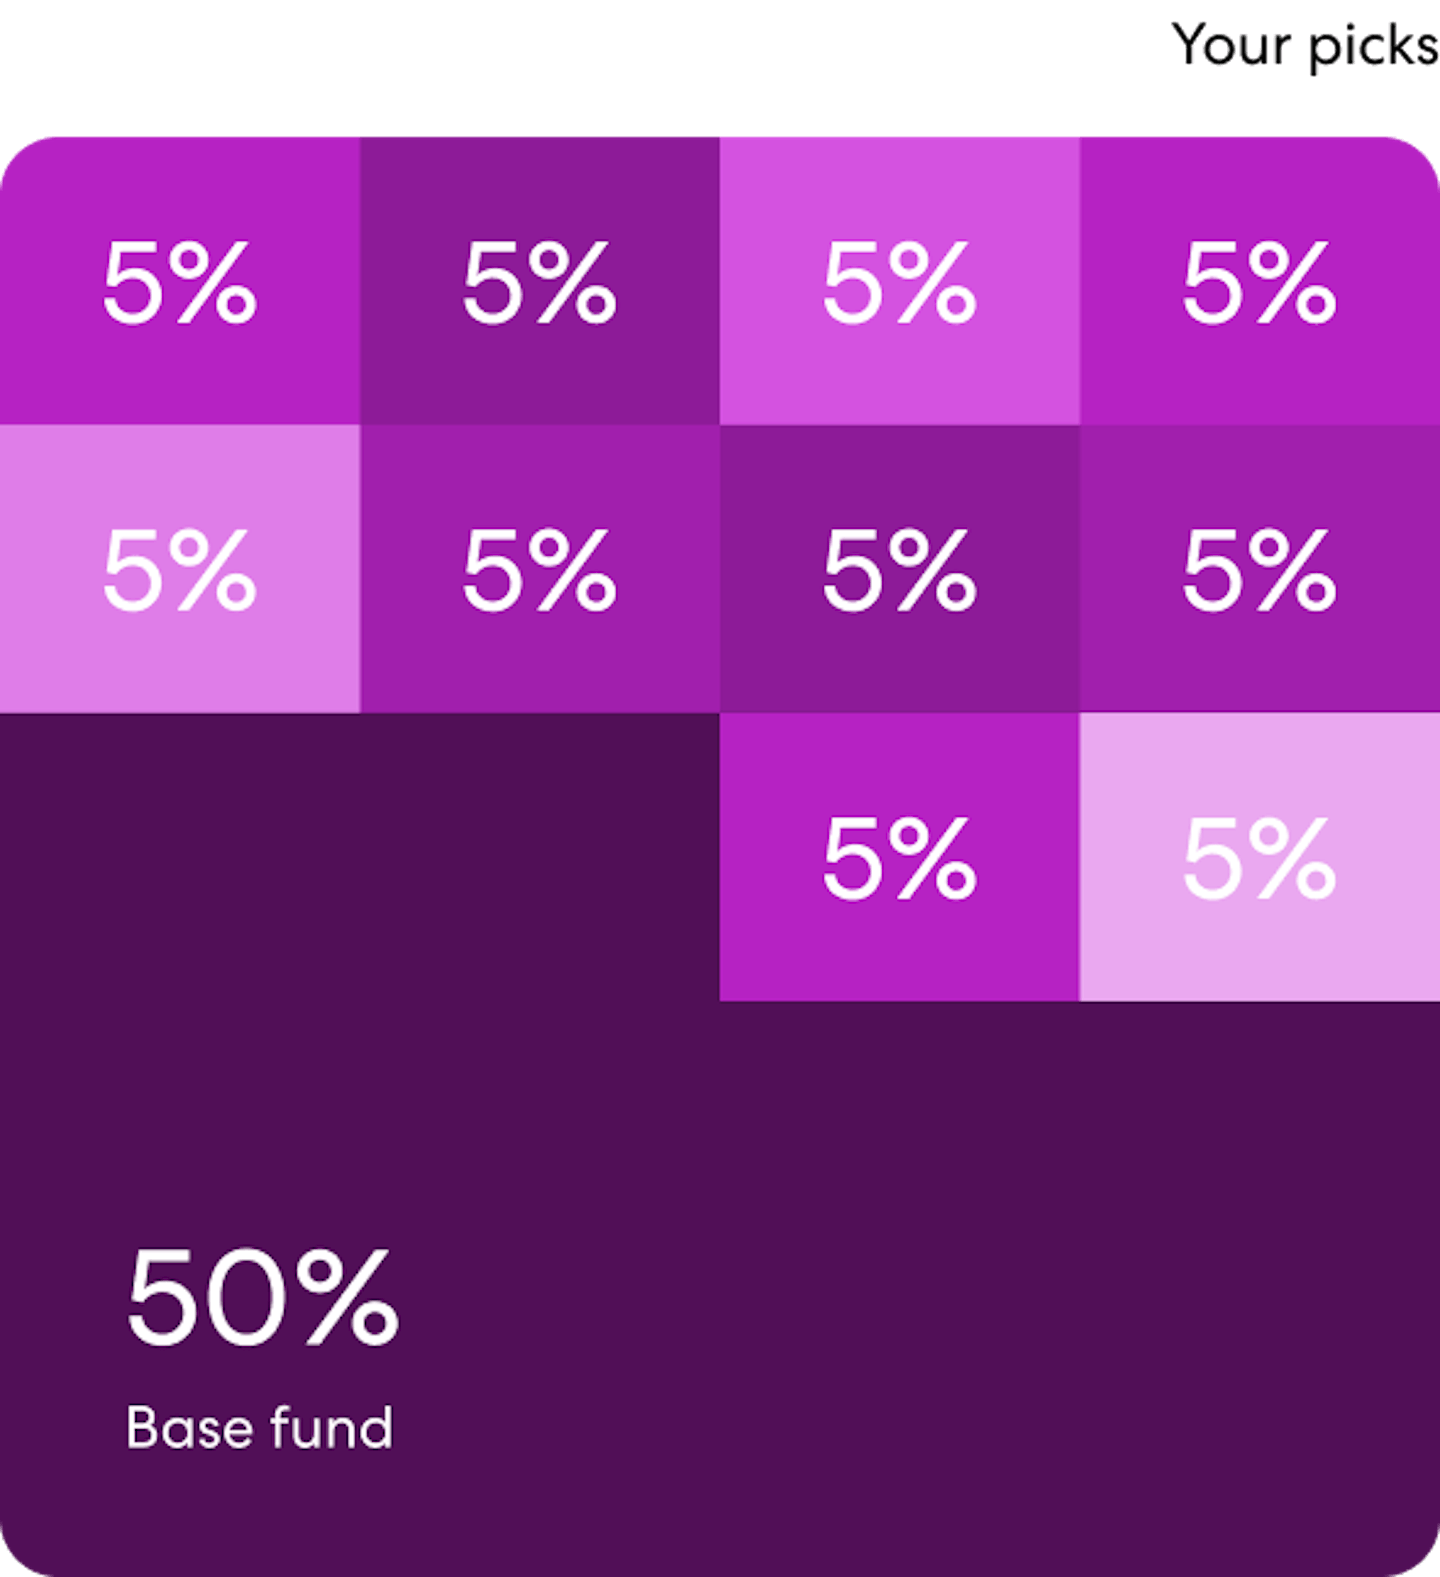 A square representing an investment plan is half dark purple with "50% Base fund" in the bottom left corner. The other half is made up of 10 smaller squares with "5%" on each, representing the amount allocated into self-select investments.